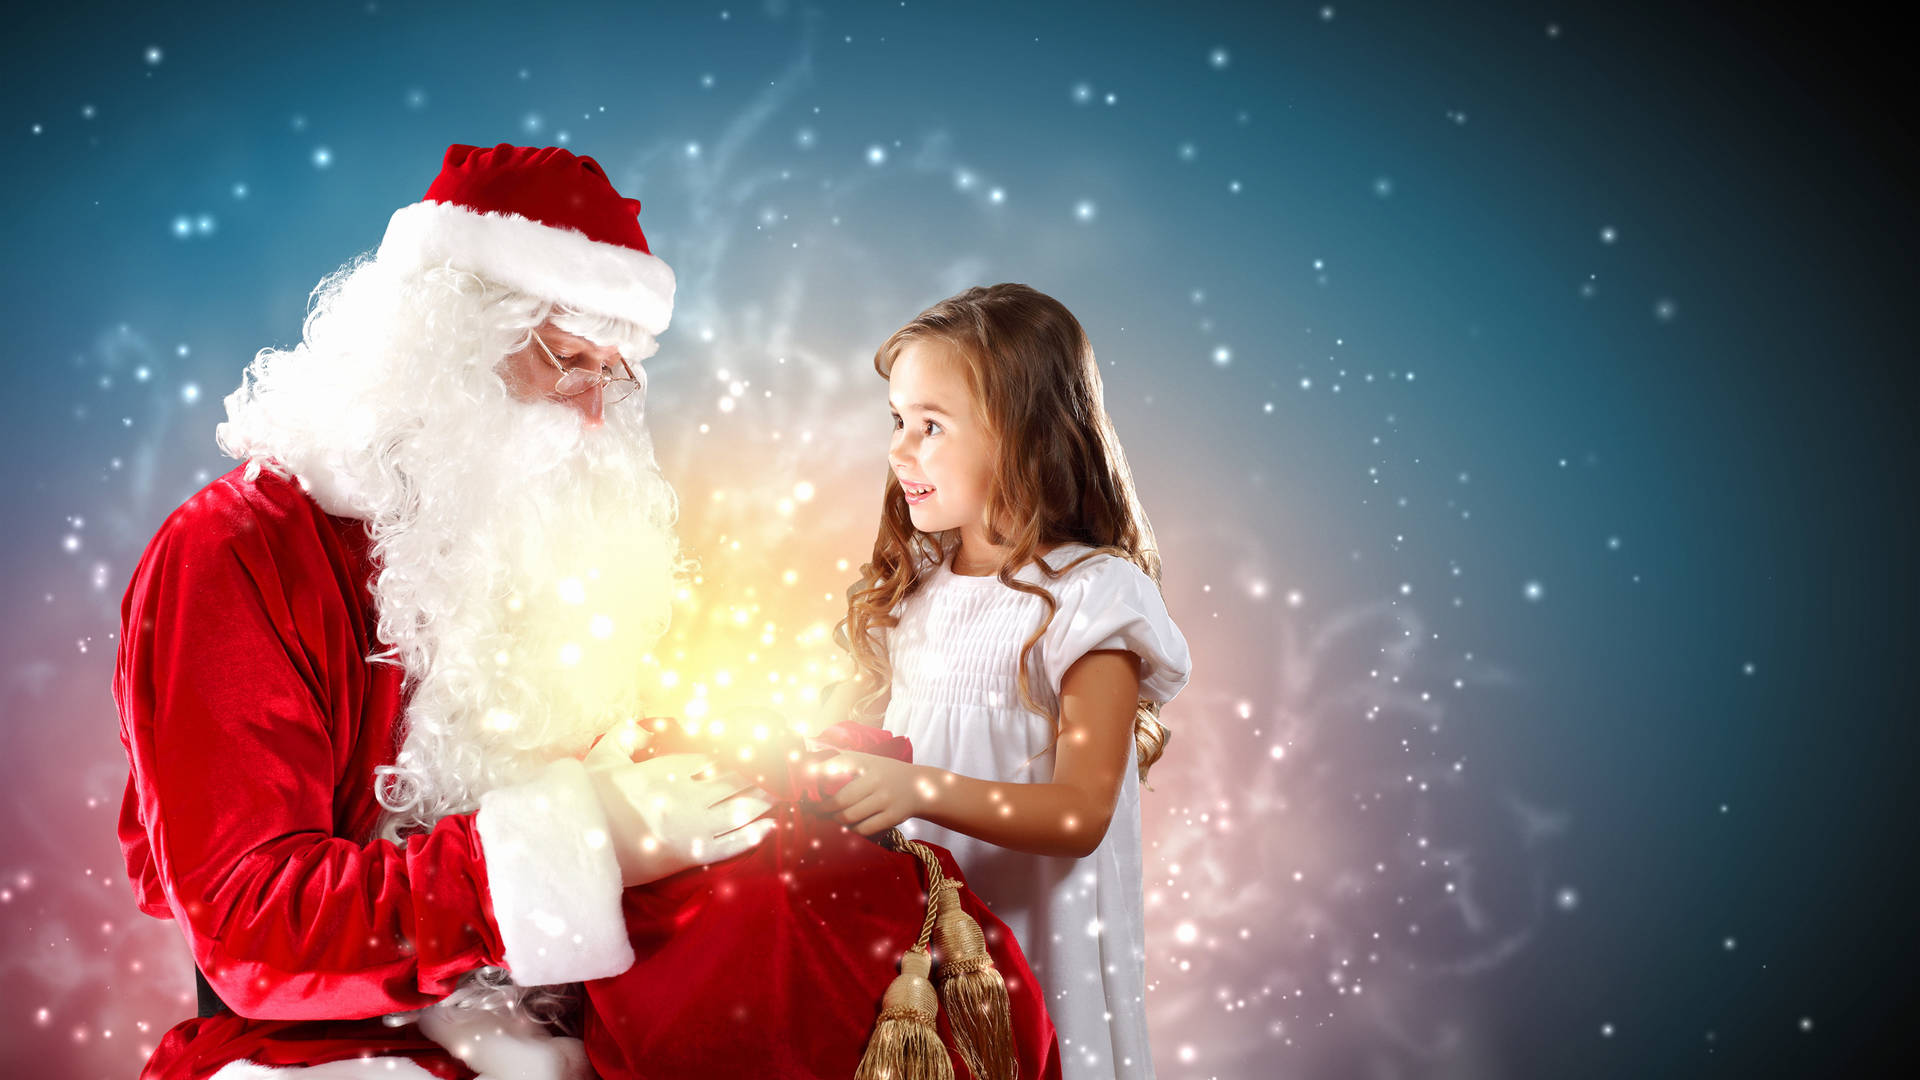 Santa Claus With Little Girl